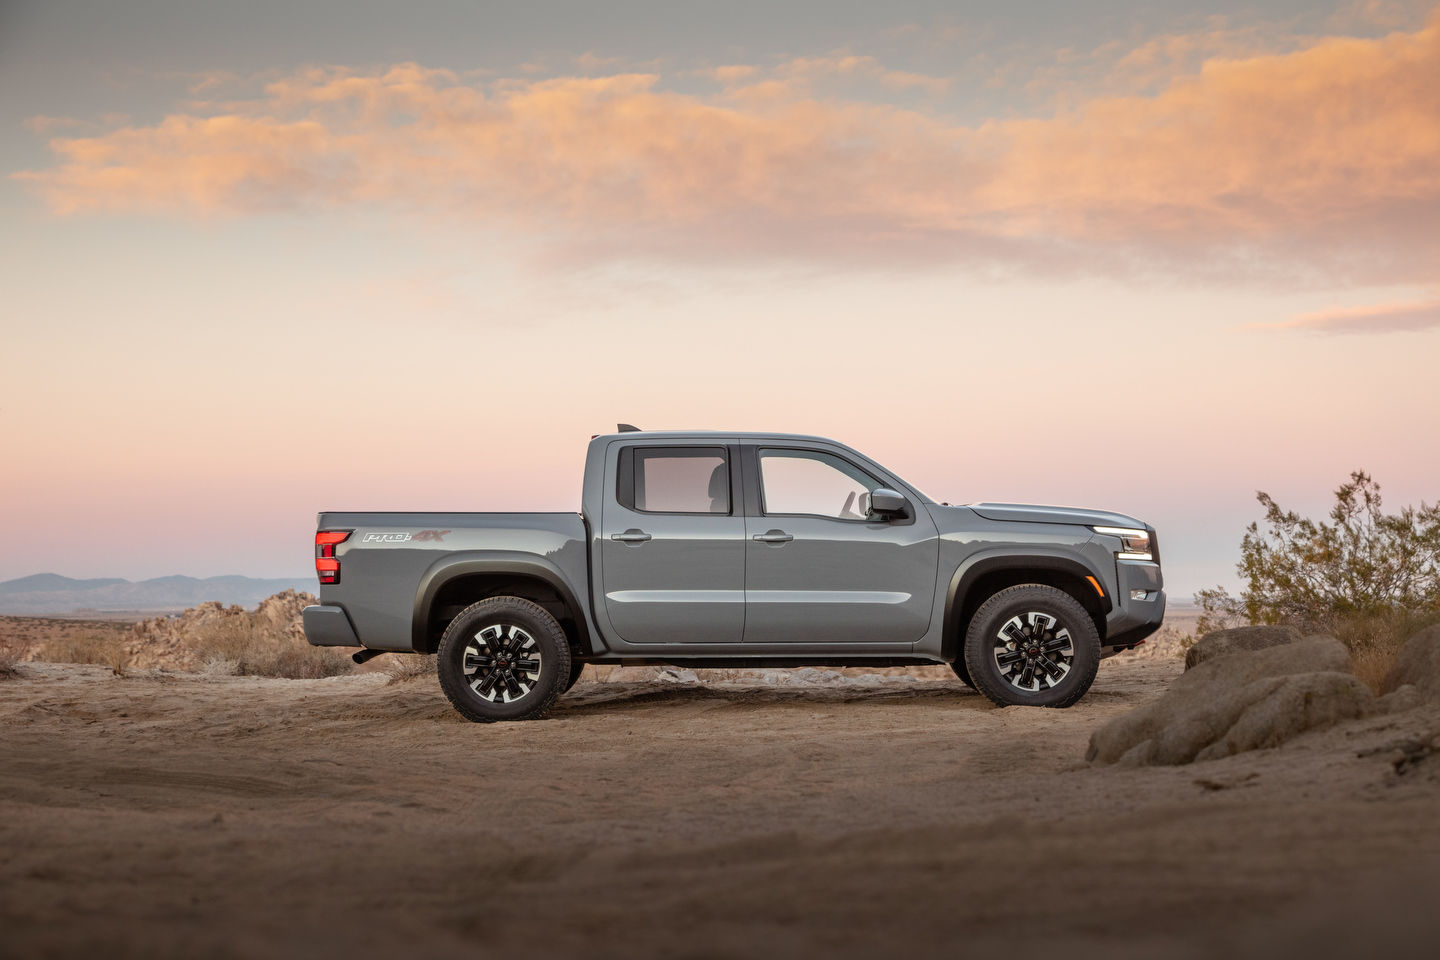 Comparing the Nissan Frontier to the Ford Ranger: Frontier all the way